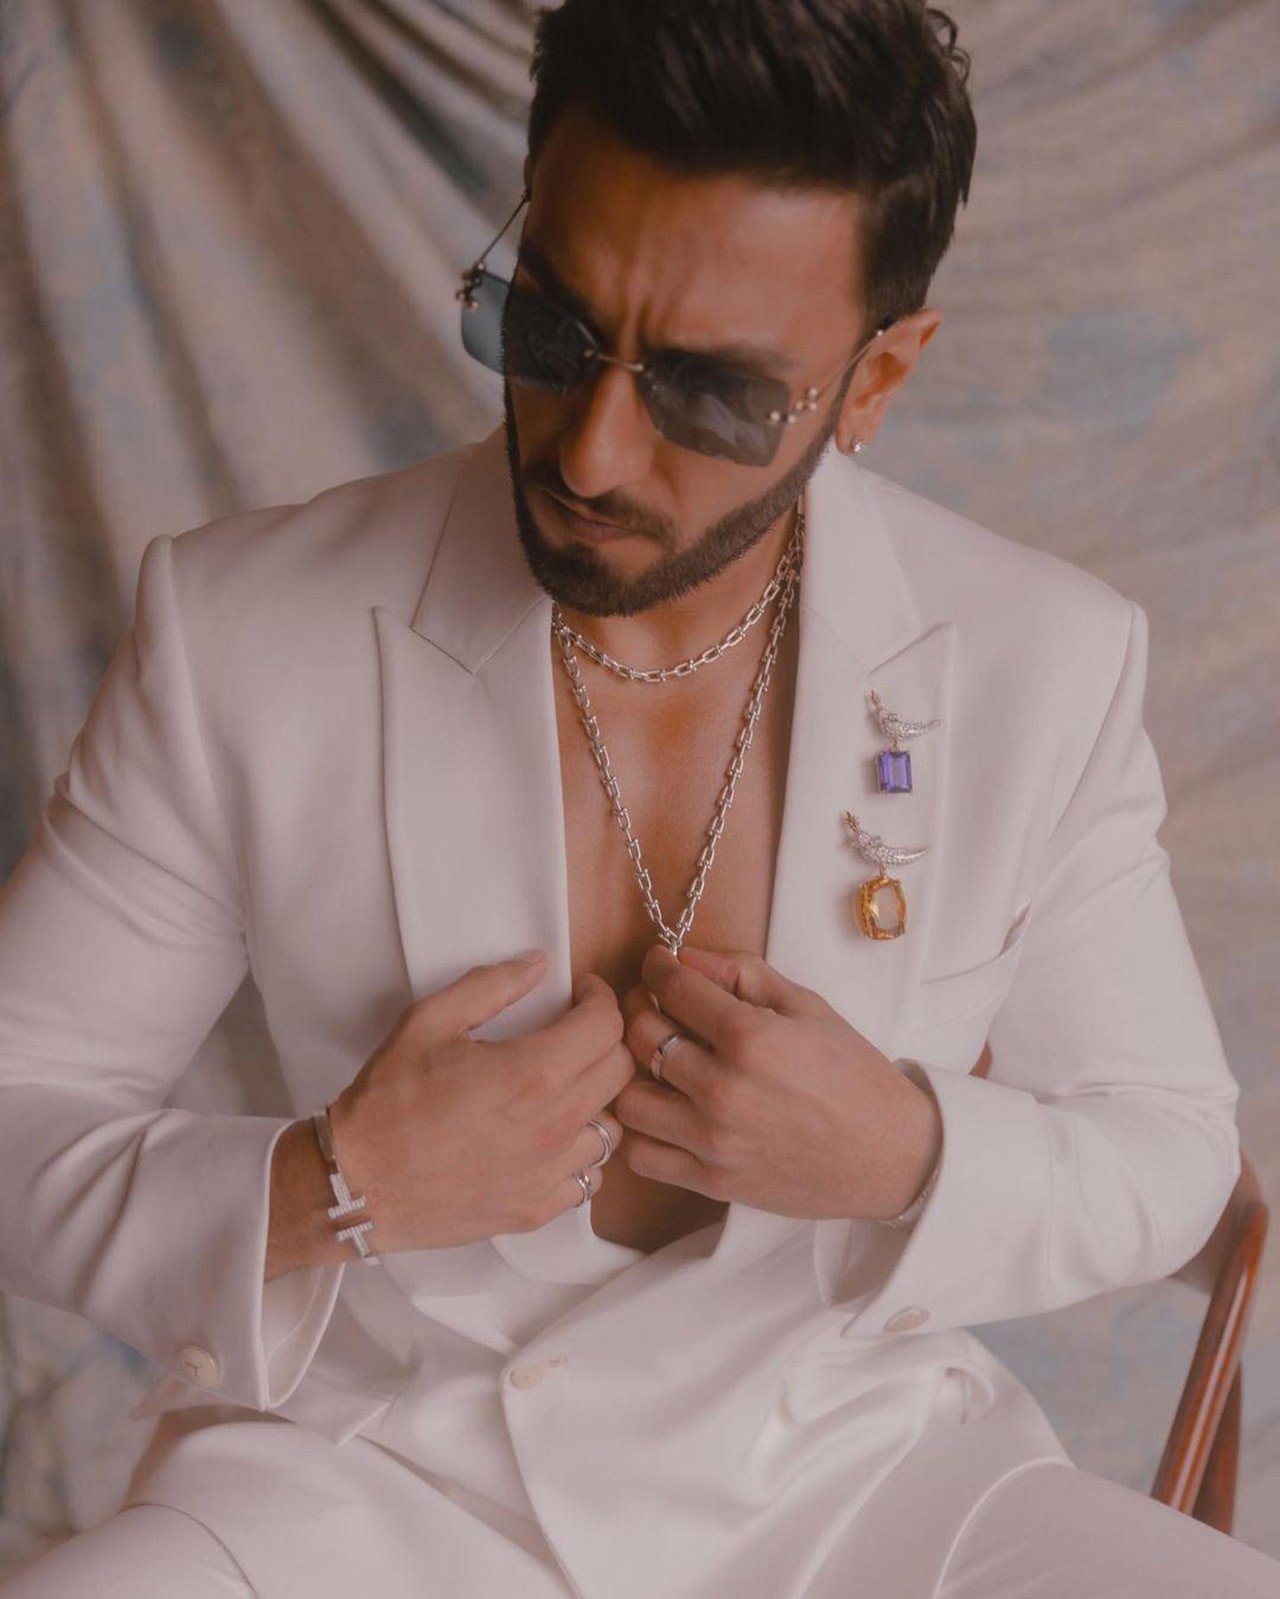 Ranveer Singh takes over NYC in an all-white suit & jewellery, adding his  signature flair to the star-studded Tiffany & Co. event : Bollywood News -  Bollywood Hungama